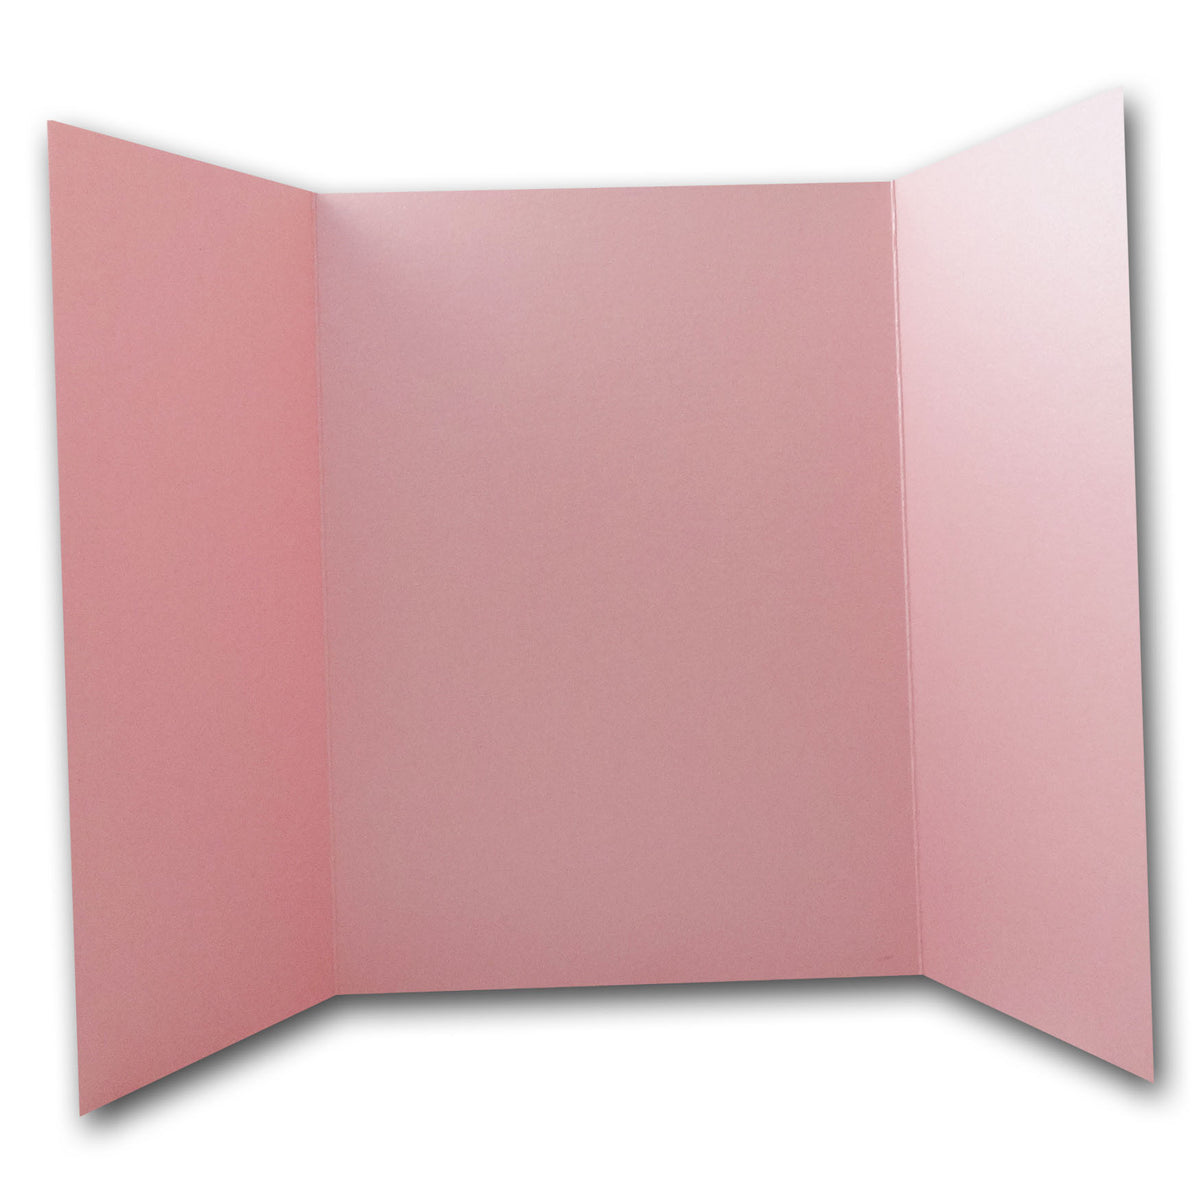 Shimmery Pink 5x7 Gatefold Discount Card Stock DIY Invitations